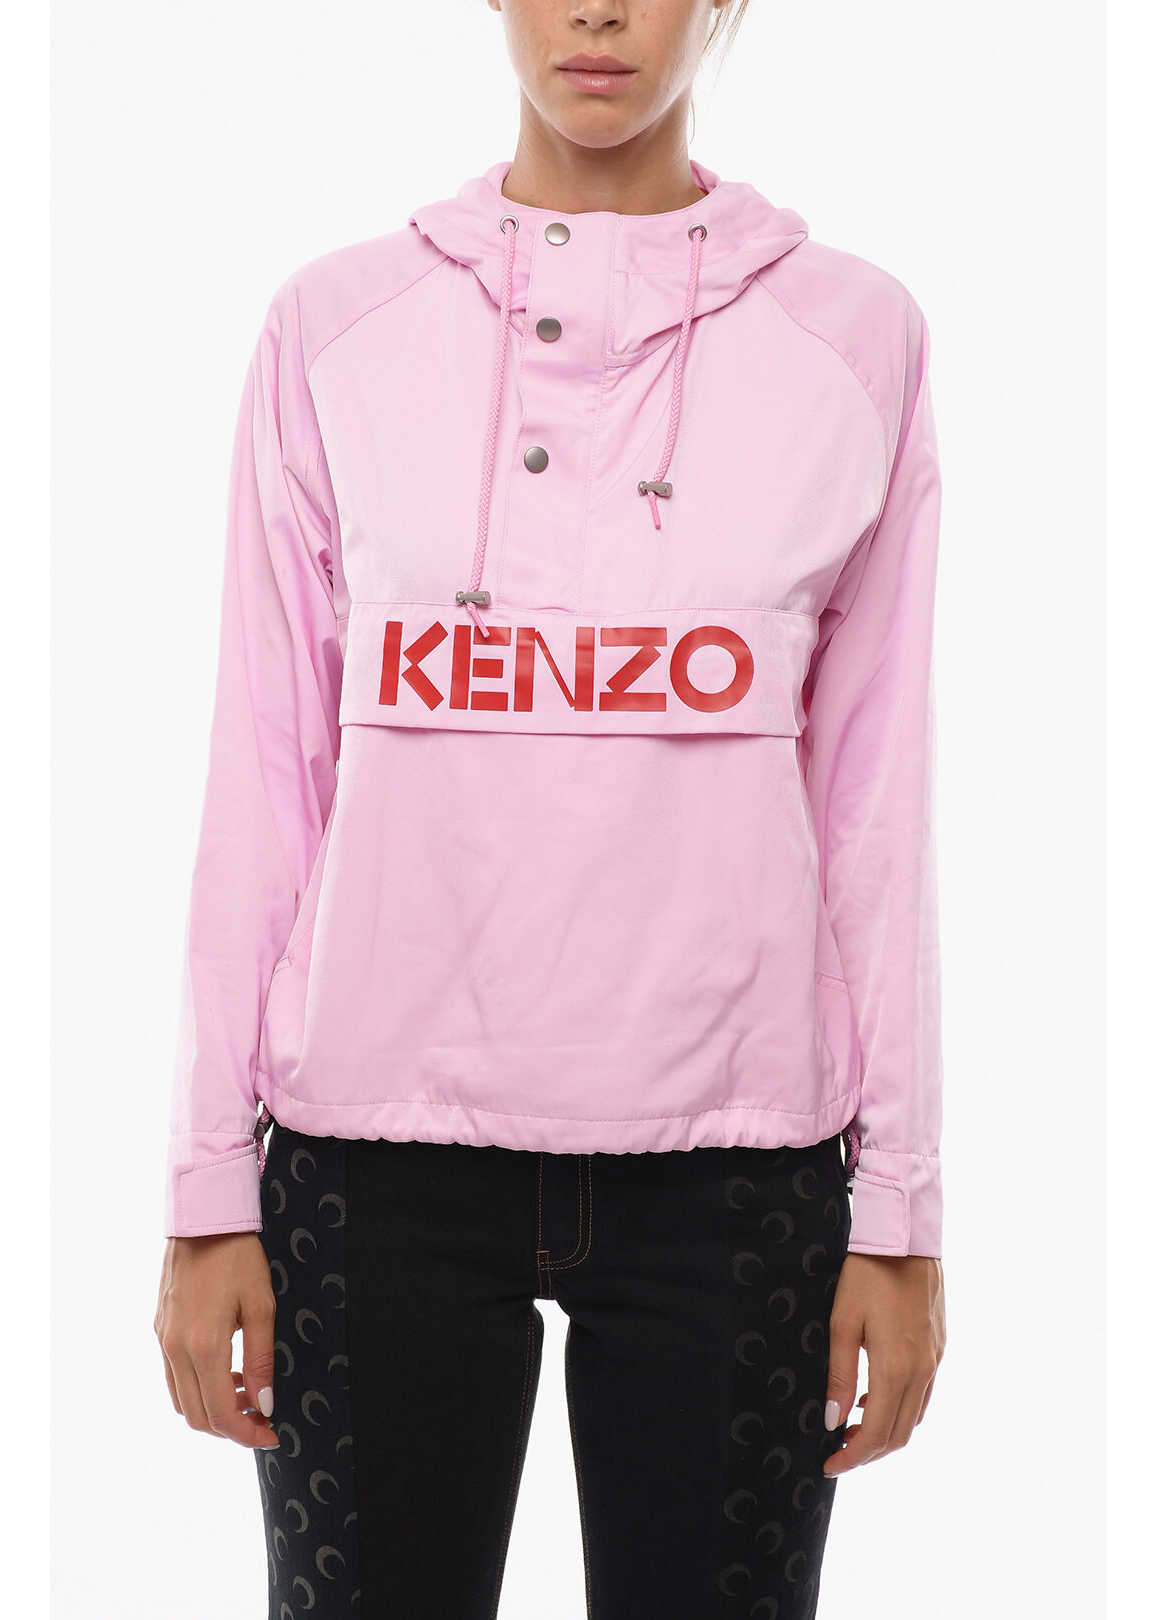 Kenzo Lightweight Anorak Jacket With Silver Buttons Pink